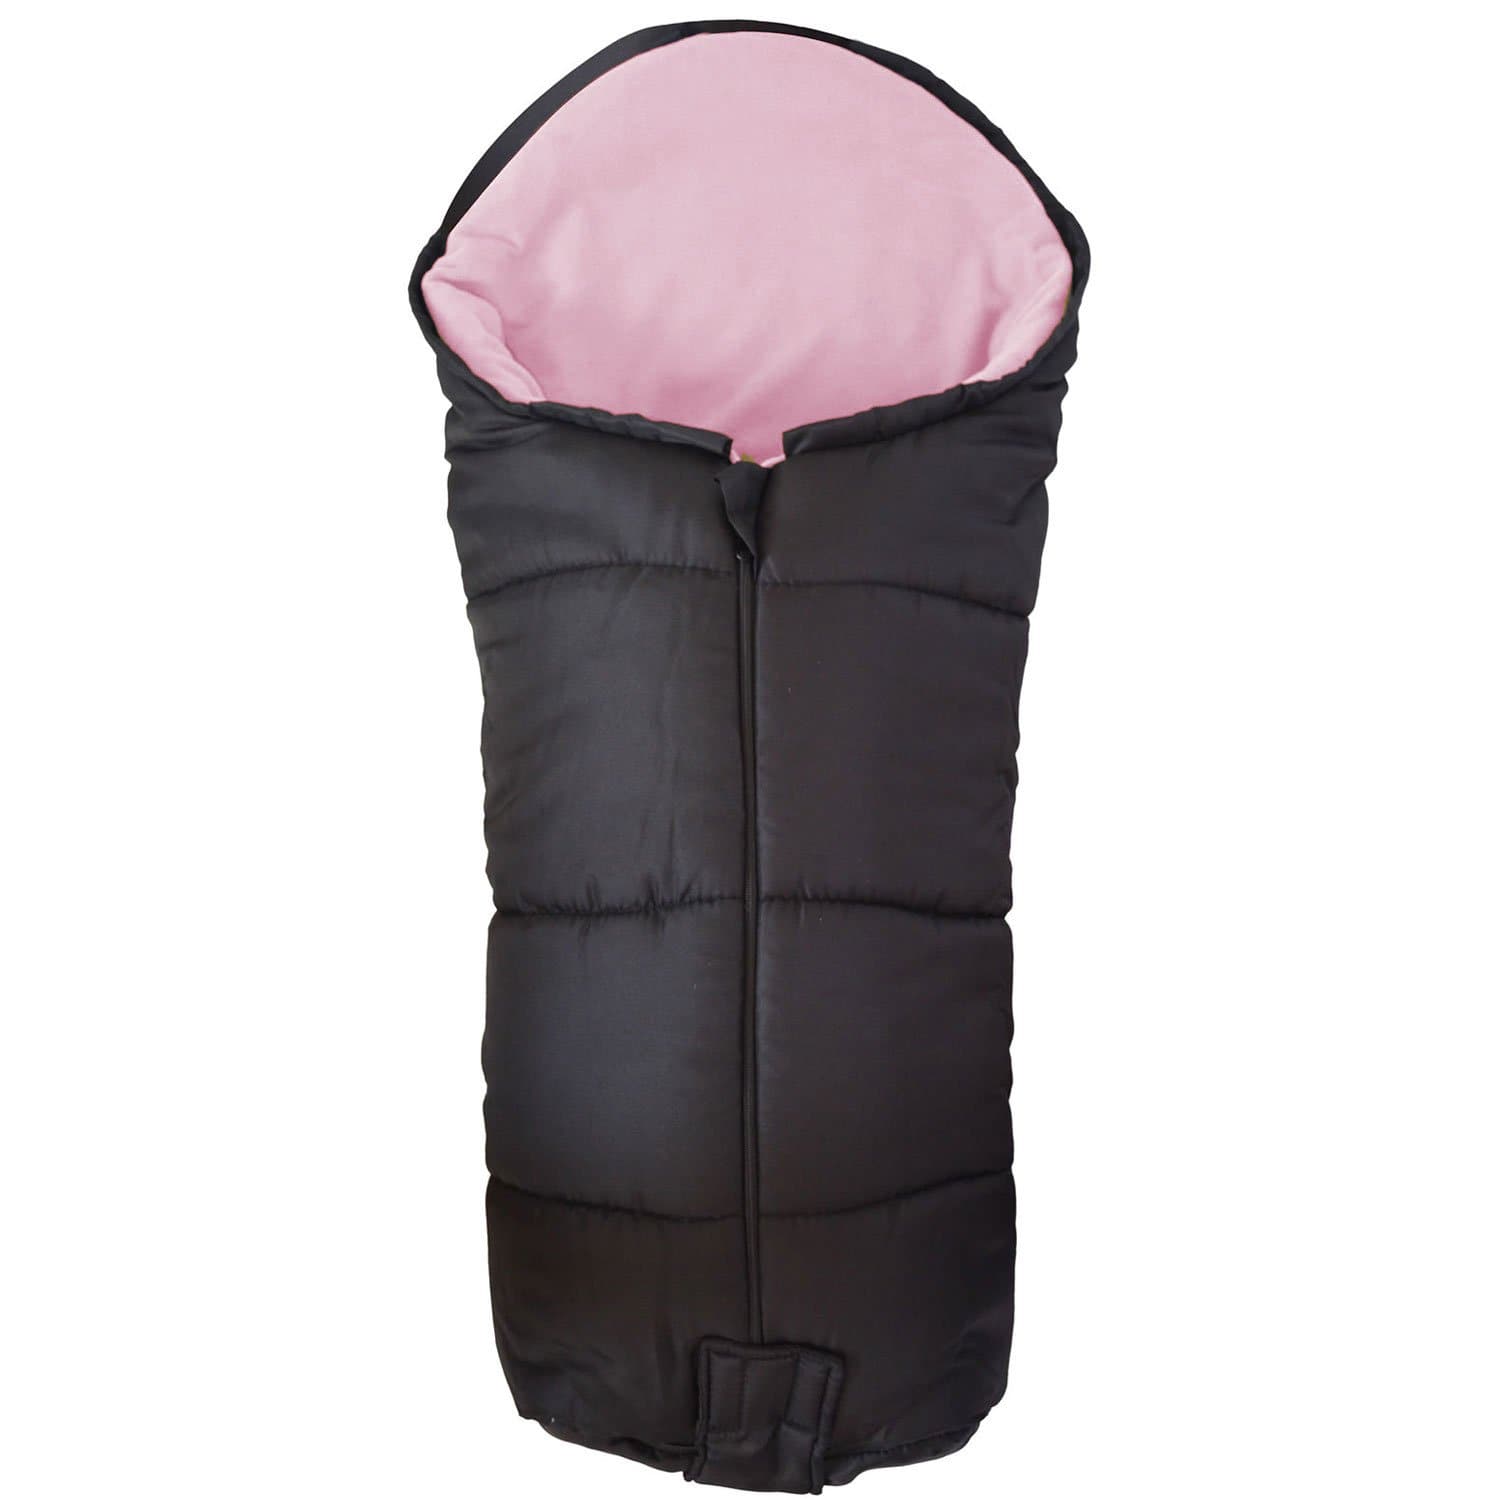 Deluxe Footmuff / Cosy Toes Compatible with Inglesina - Light Pink / Fits All Models | For Your Little One